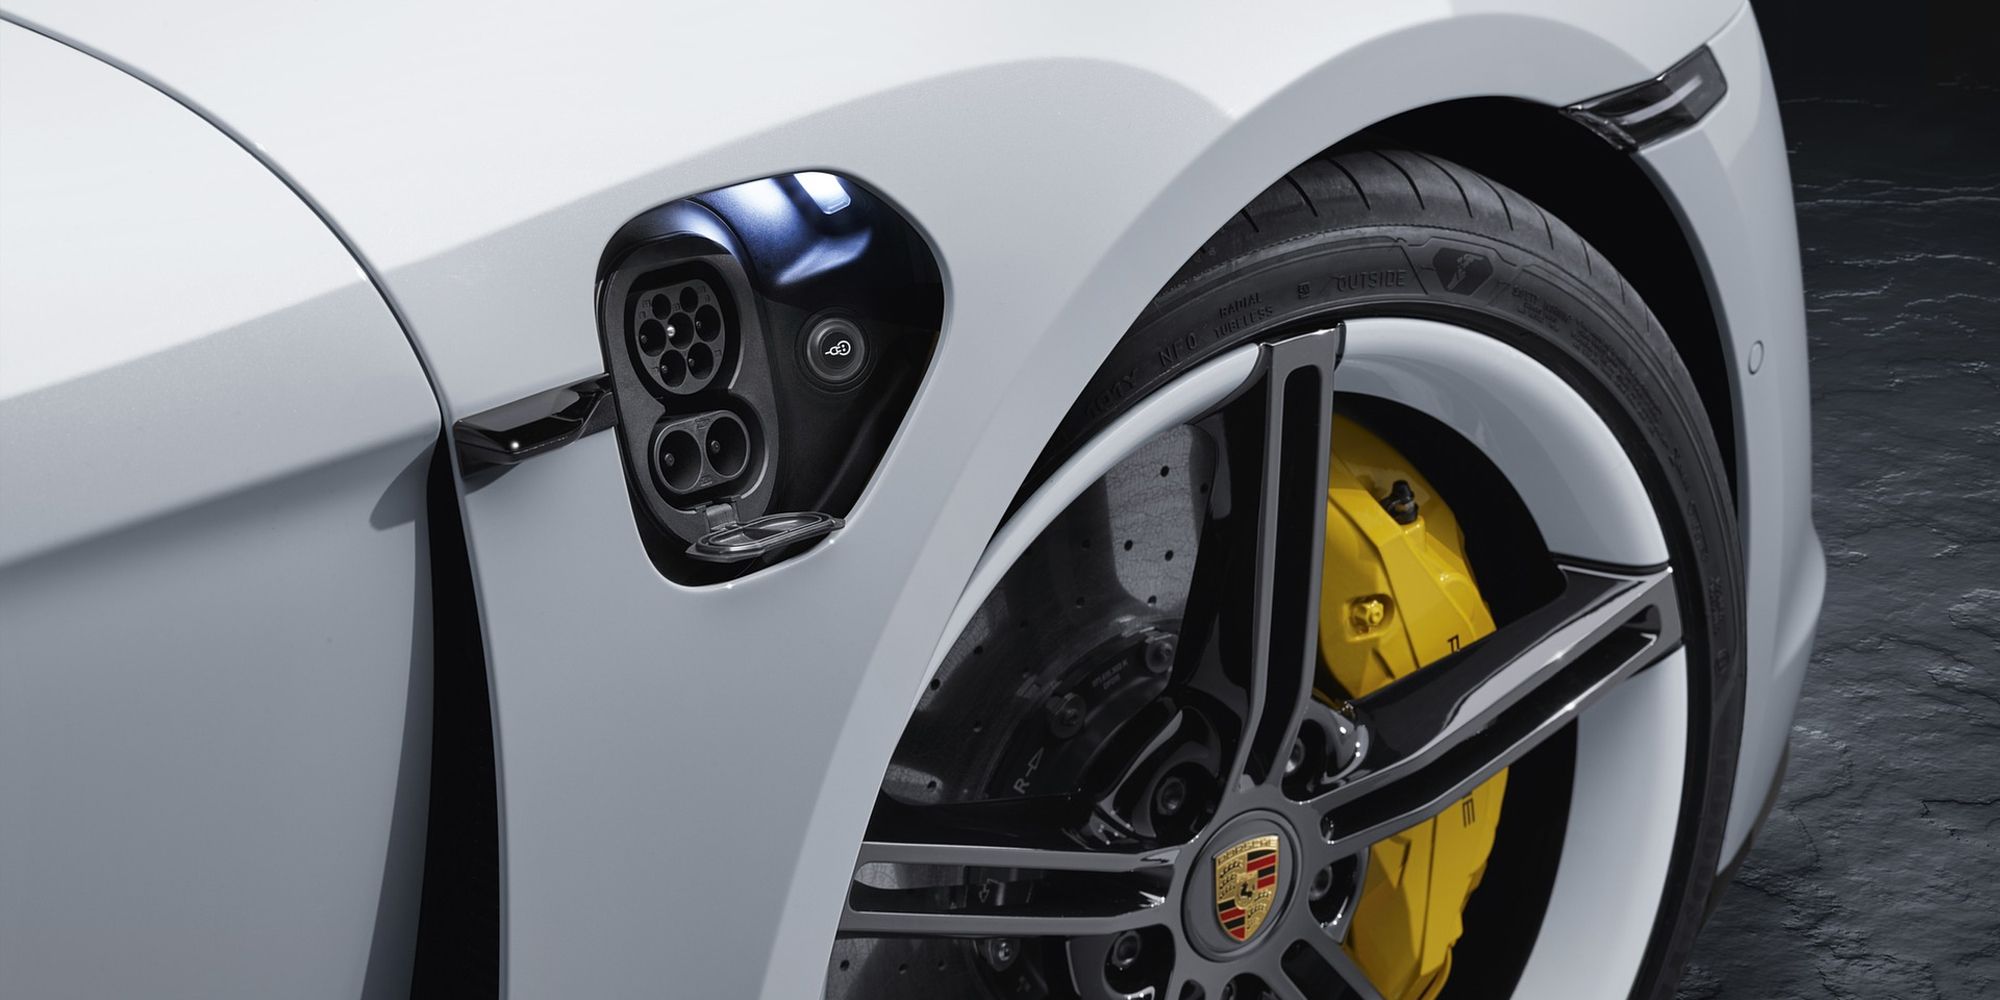 The Porsche Taycan's charge port